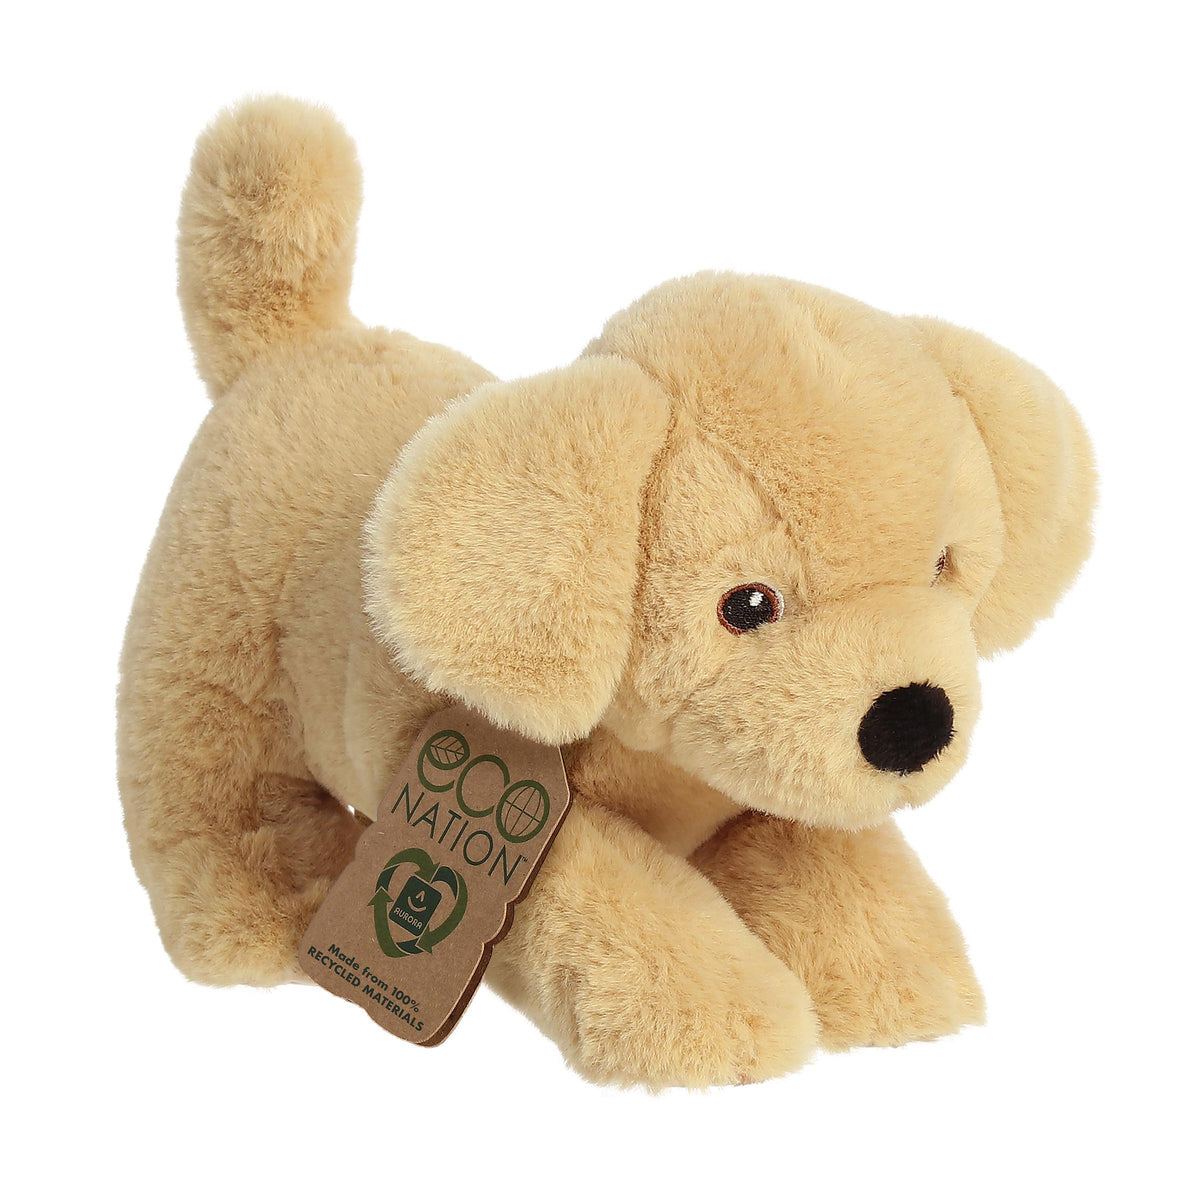 Adorable yellow lab plush that has a fluffy yellow coat, soft embroidered eyes, and an eco-nation tag around its neck